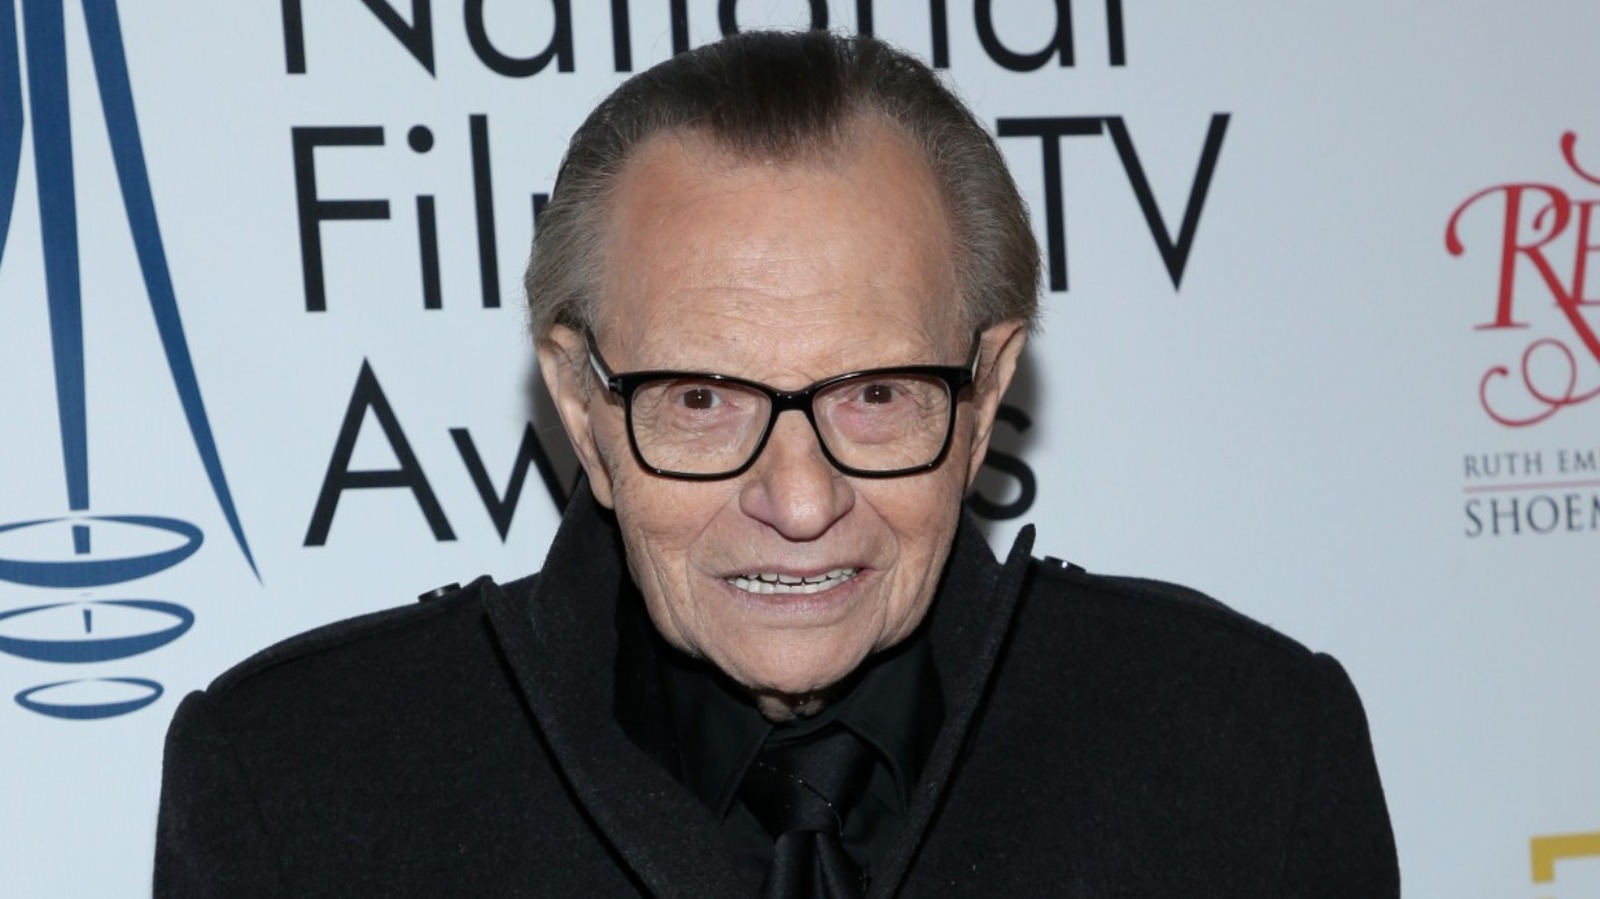 larry kings net worth how much money does the famous newscaster have